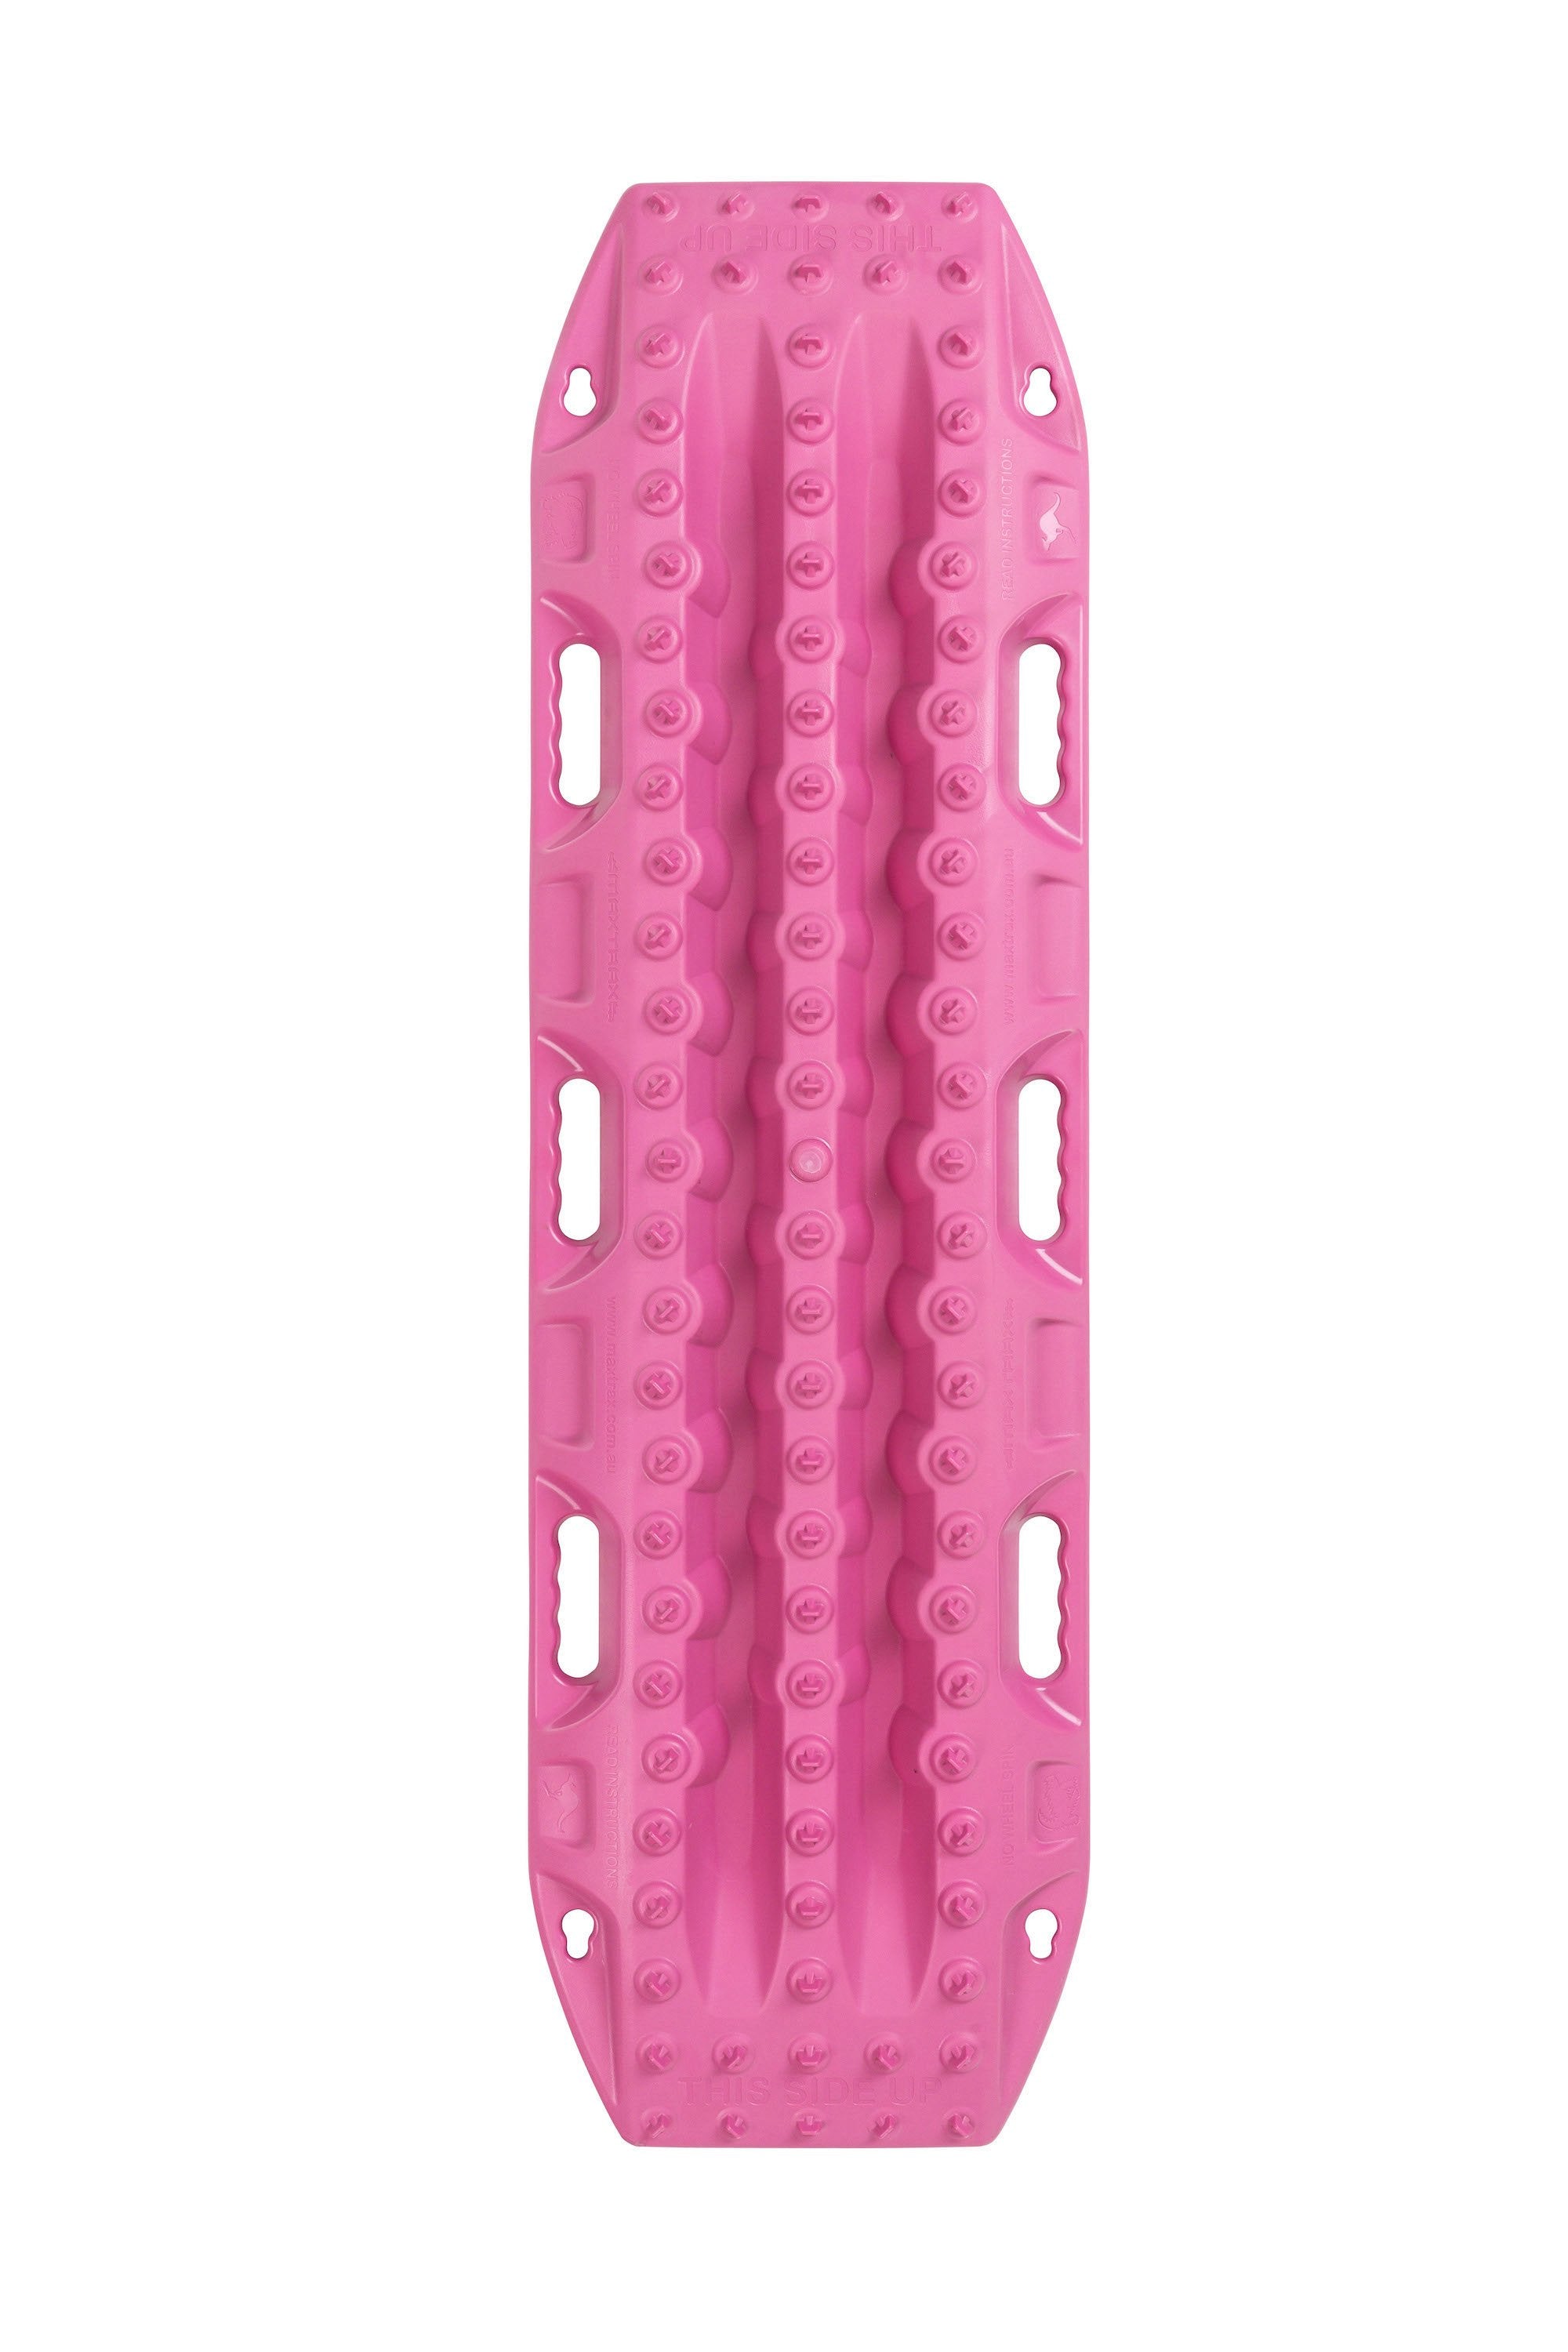 MAXTRAX MKII Pink Recovery Boards  Recovery Gear MAXTRAX- Adventure Imports